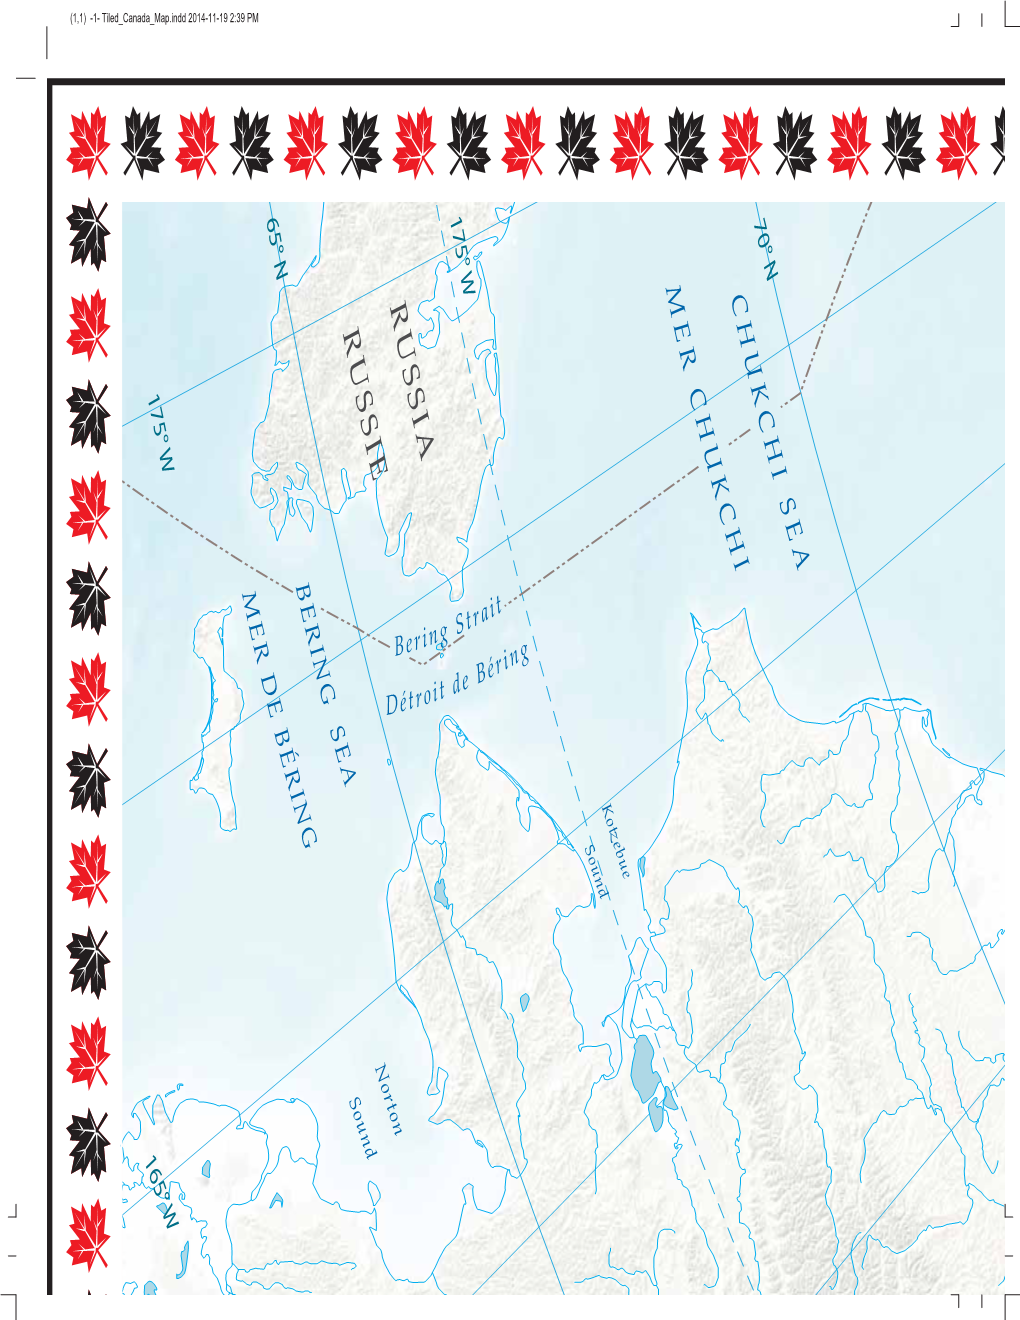 Tiled Map of Canada